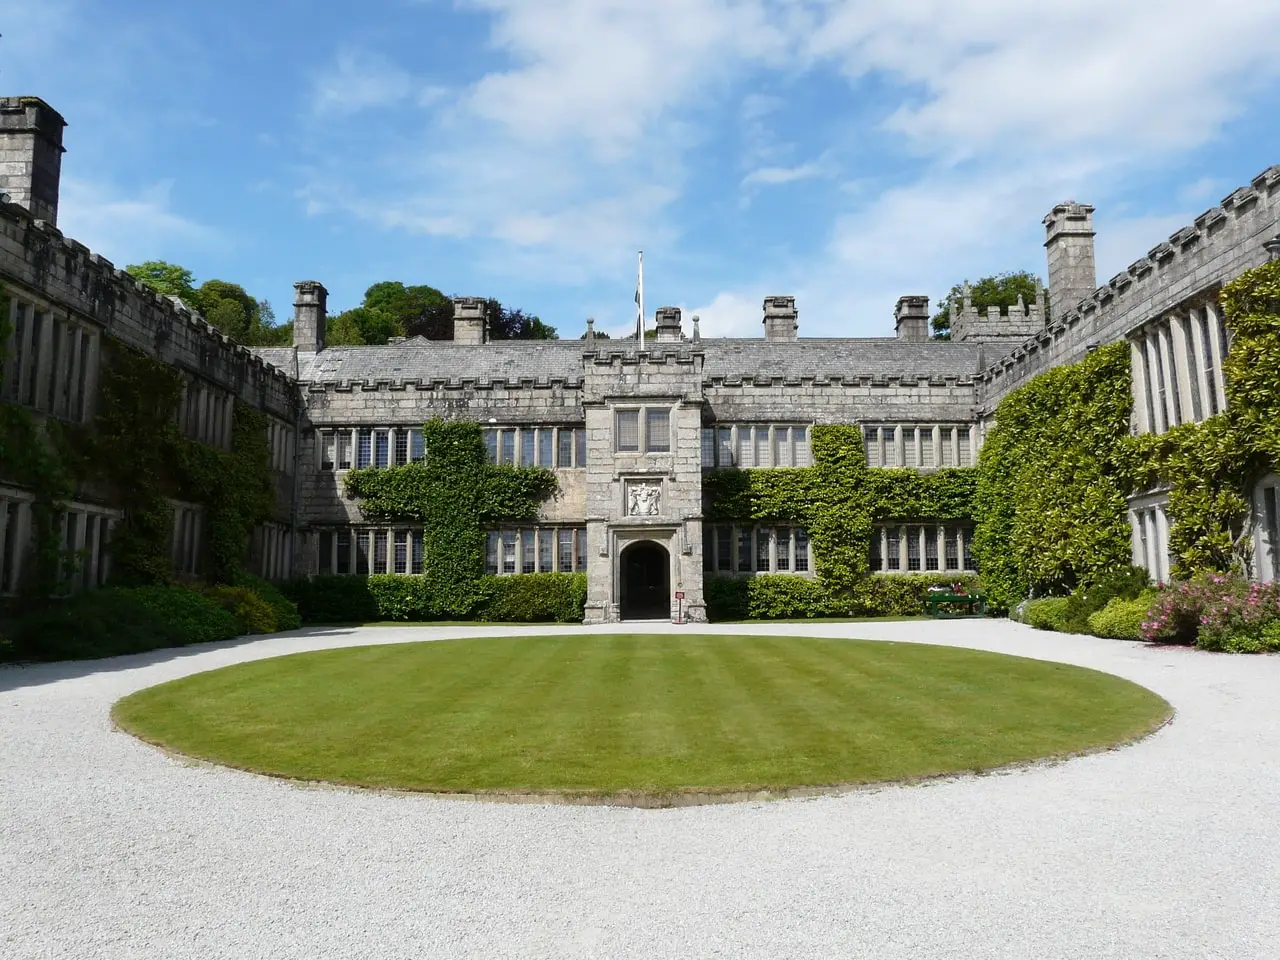 Lanhydrock manor house in England